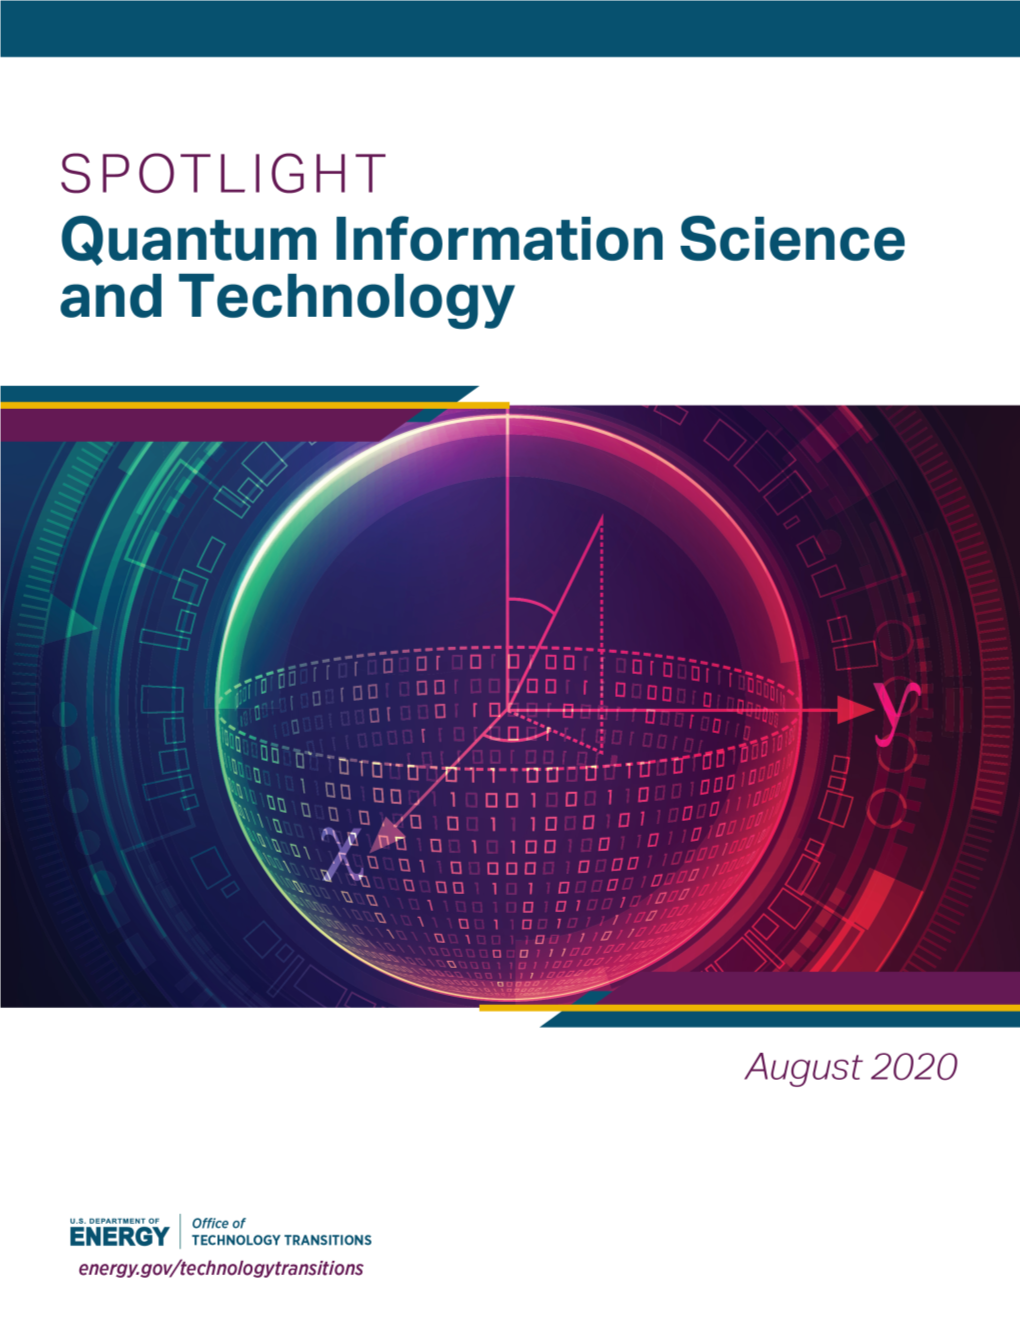 Quantum Information Science and Technology Spotlight